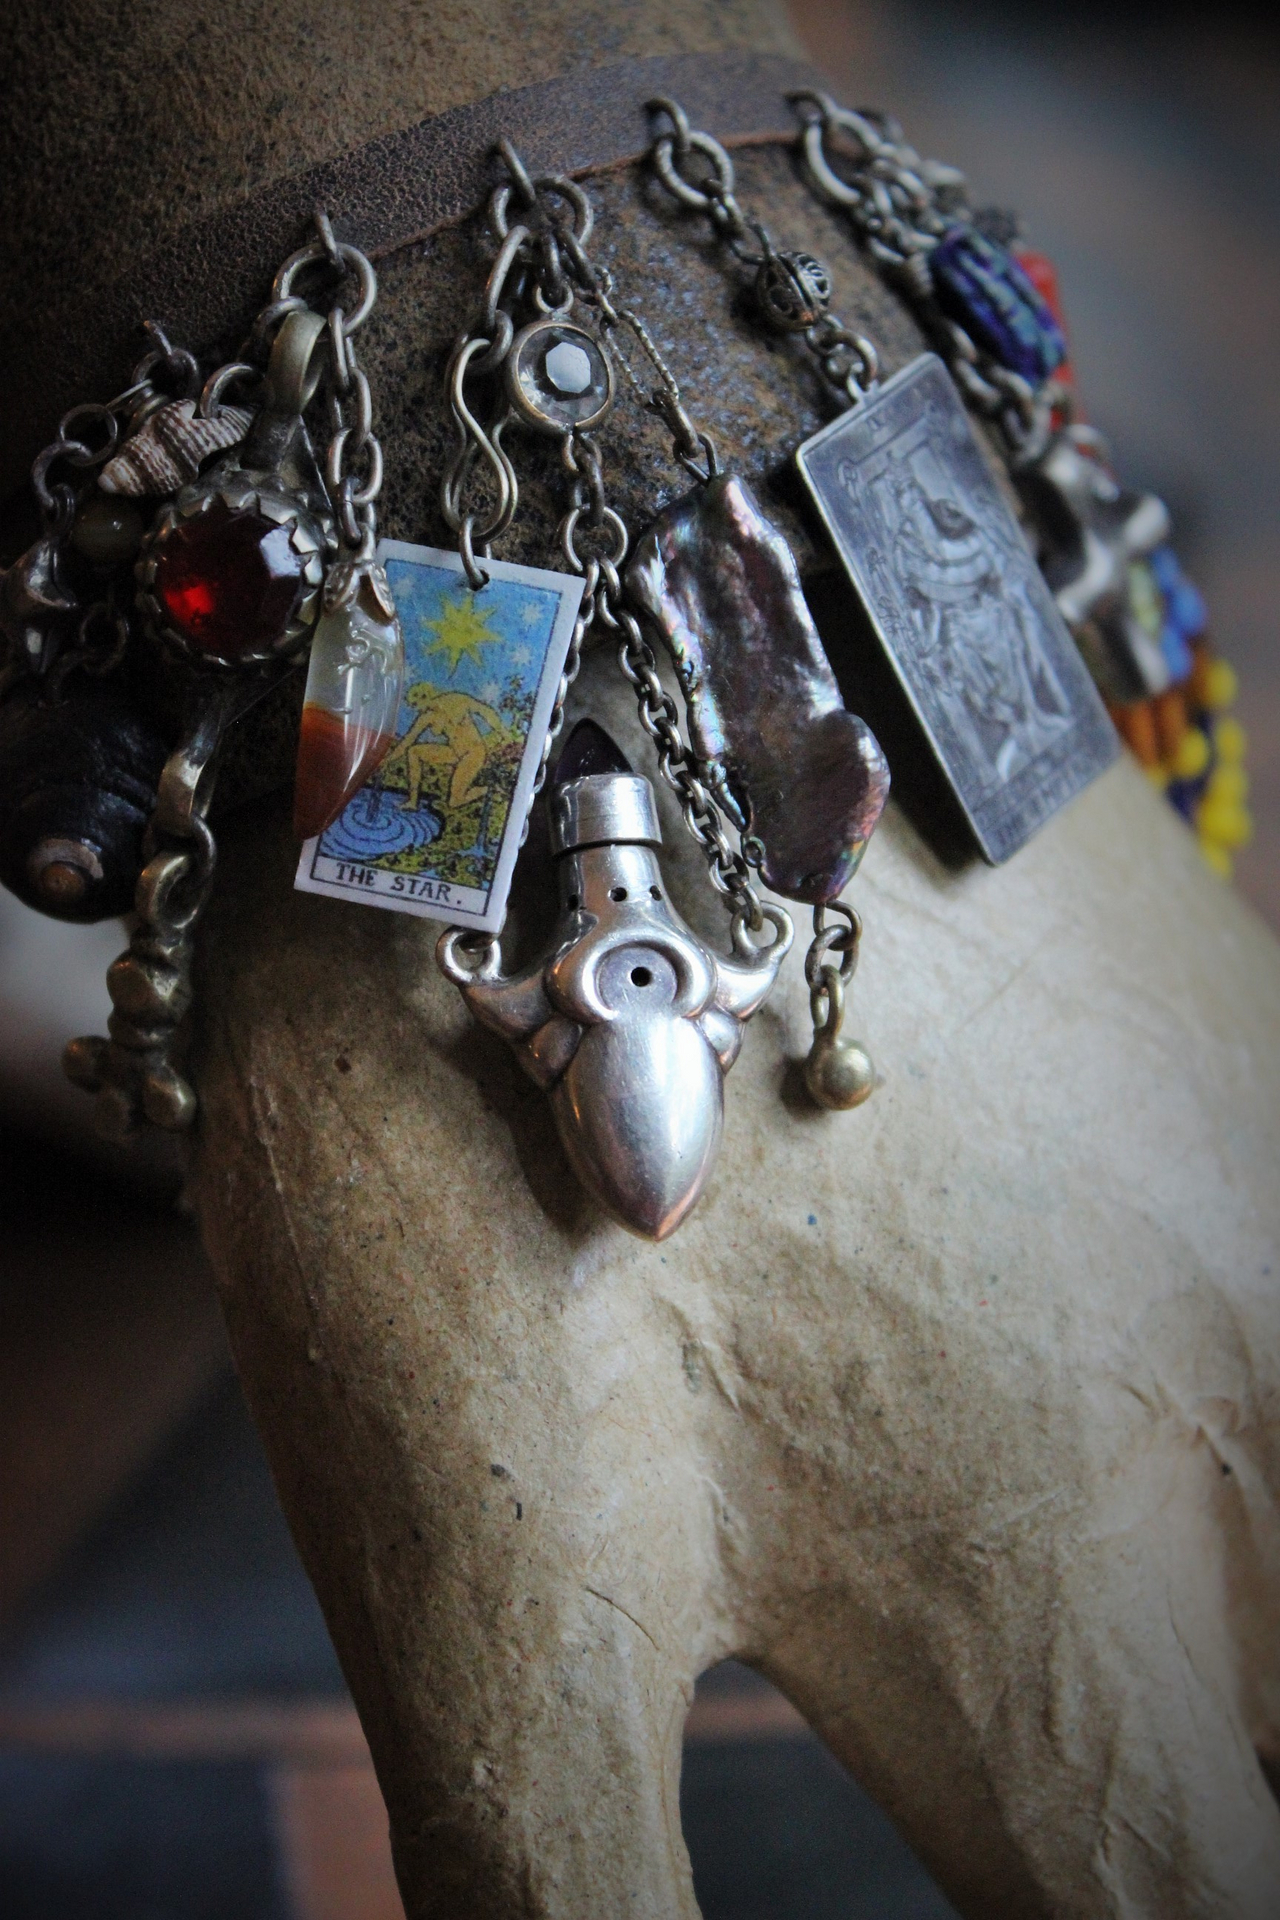 Distressed Leather Gypsy Charm Cuff Bracelet w/Sterling Tarot Medal,Mini Sterling Perfume/Oil Vessel,Antique Sterling Puffy Star & Crescent Moon Drops,Multiple